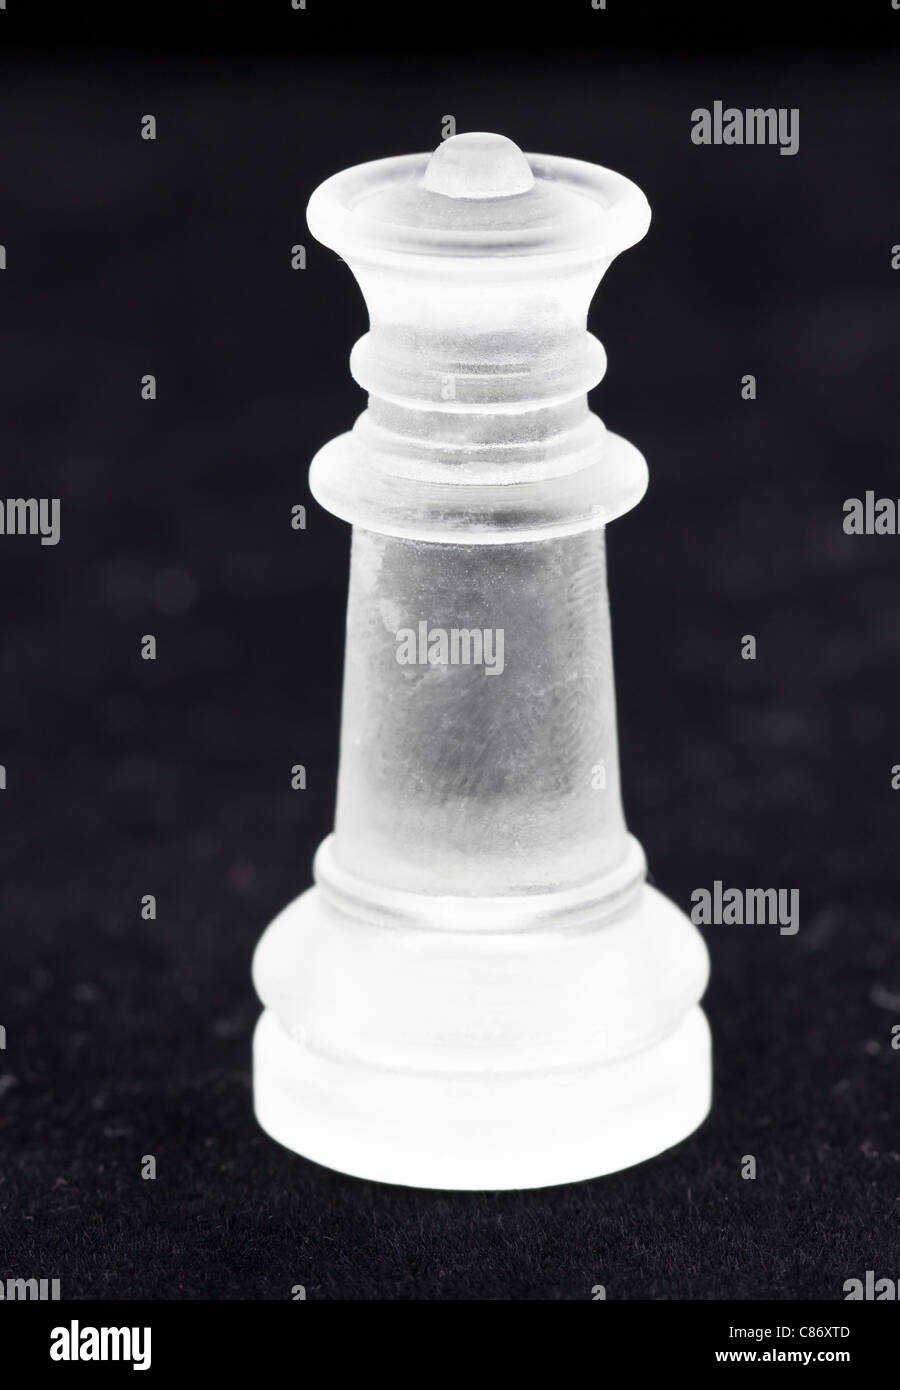 Queen chess piece made of tinted glass Stock Photo